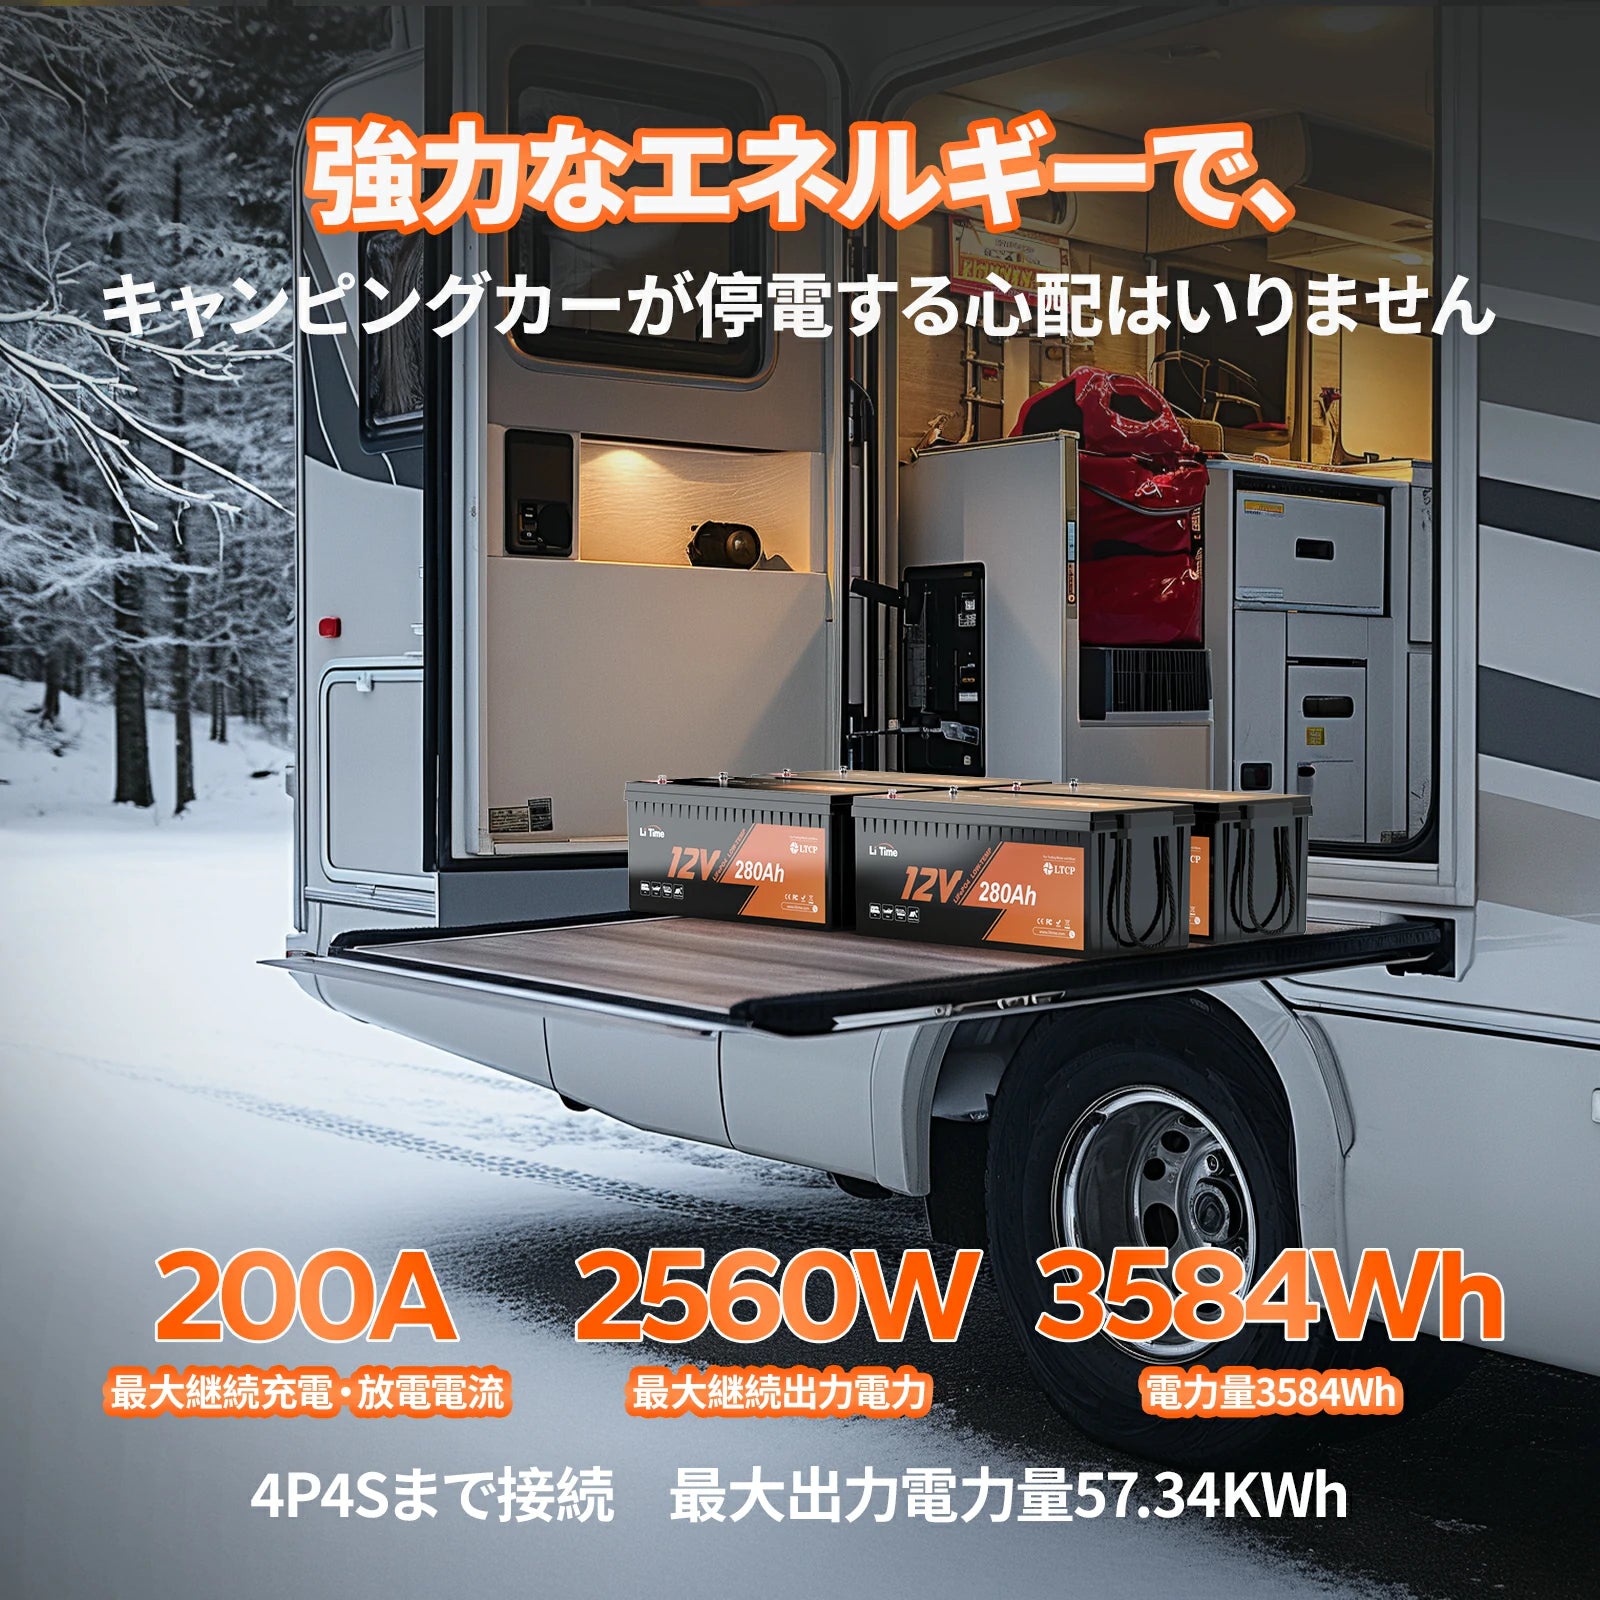 LiTime 12V 280Ah 低温保護付きリン酸鉄リチウムイオンバッテリー 200AのBMS 3584Wh ampere time